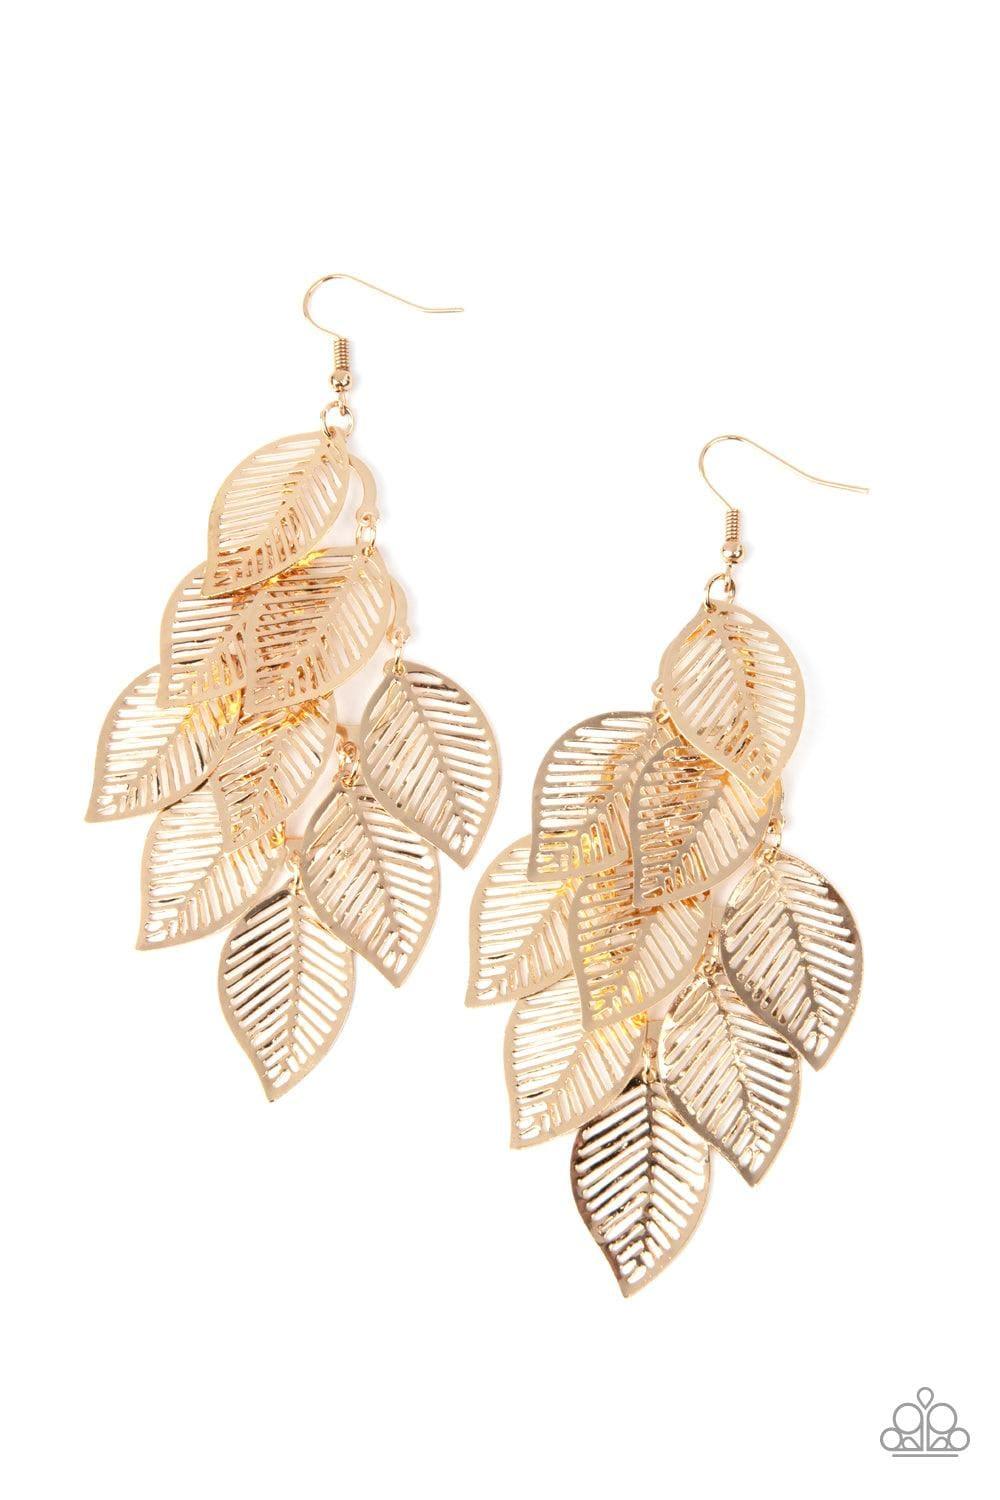 Paparazzi Accessories - Limitlessly Leafy - Gold Earrings - Bling by JessieK